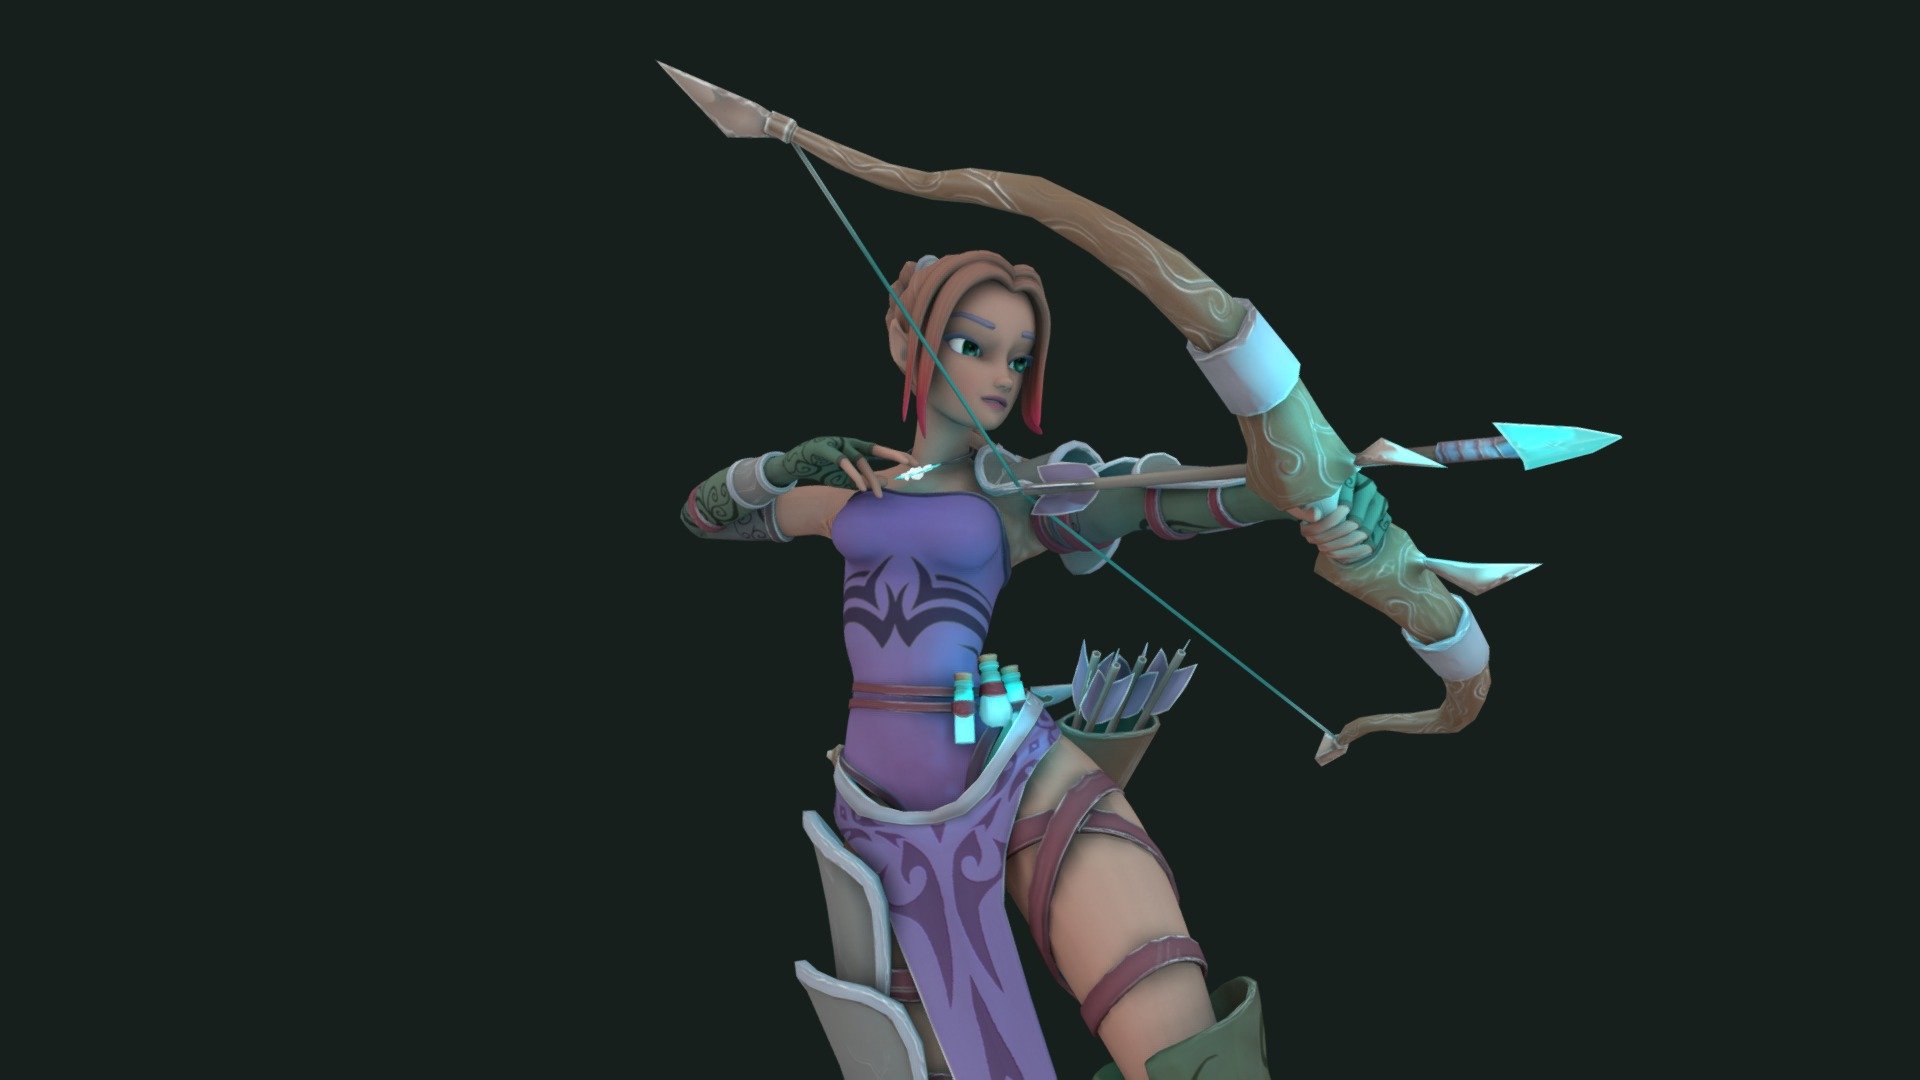 Hey! 
Welcome to my page)
I am an aspiring artist from Ukraine.
If you like my model, you can see other works in Artstation! Thanks)

https://www.artstation.com/kotomyp - Archer - 3D model by djslavon13 3d model